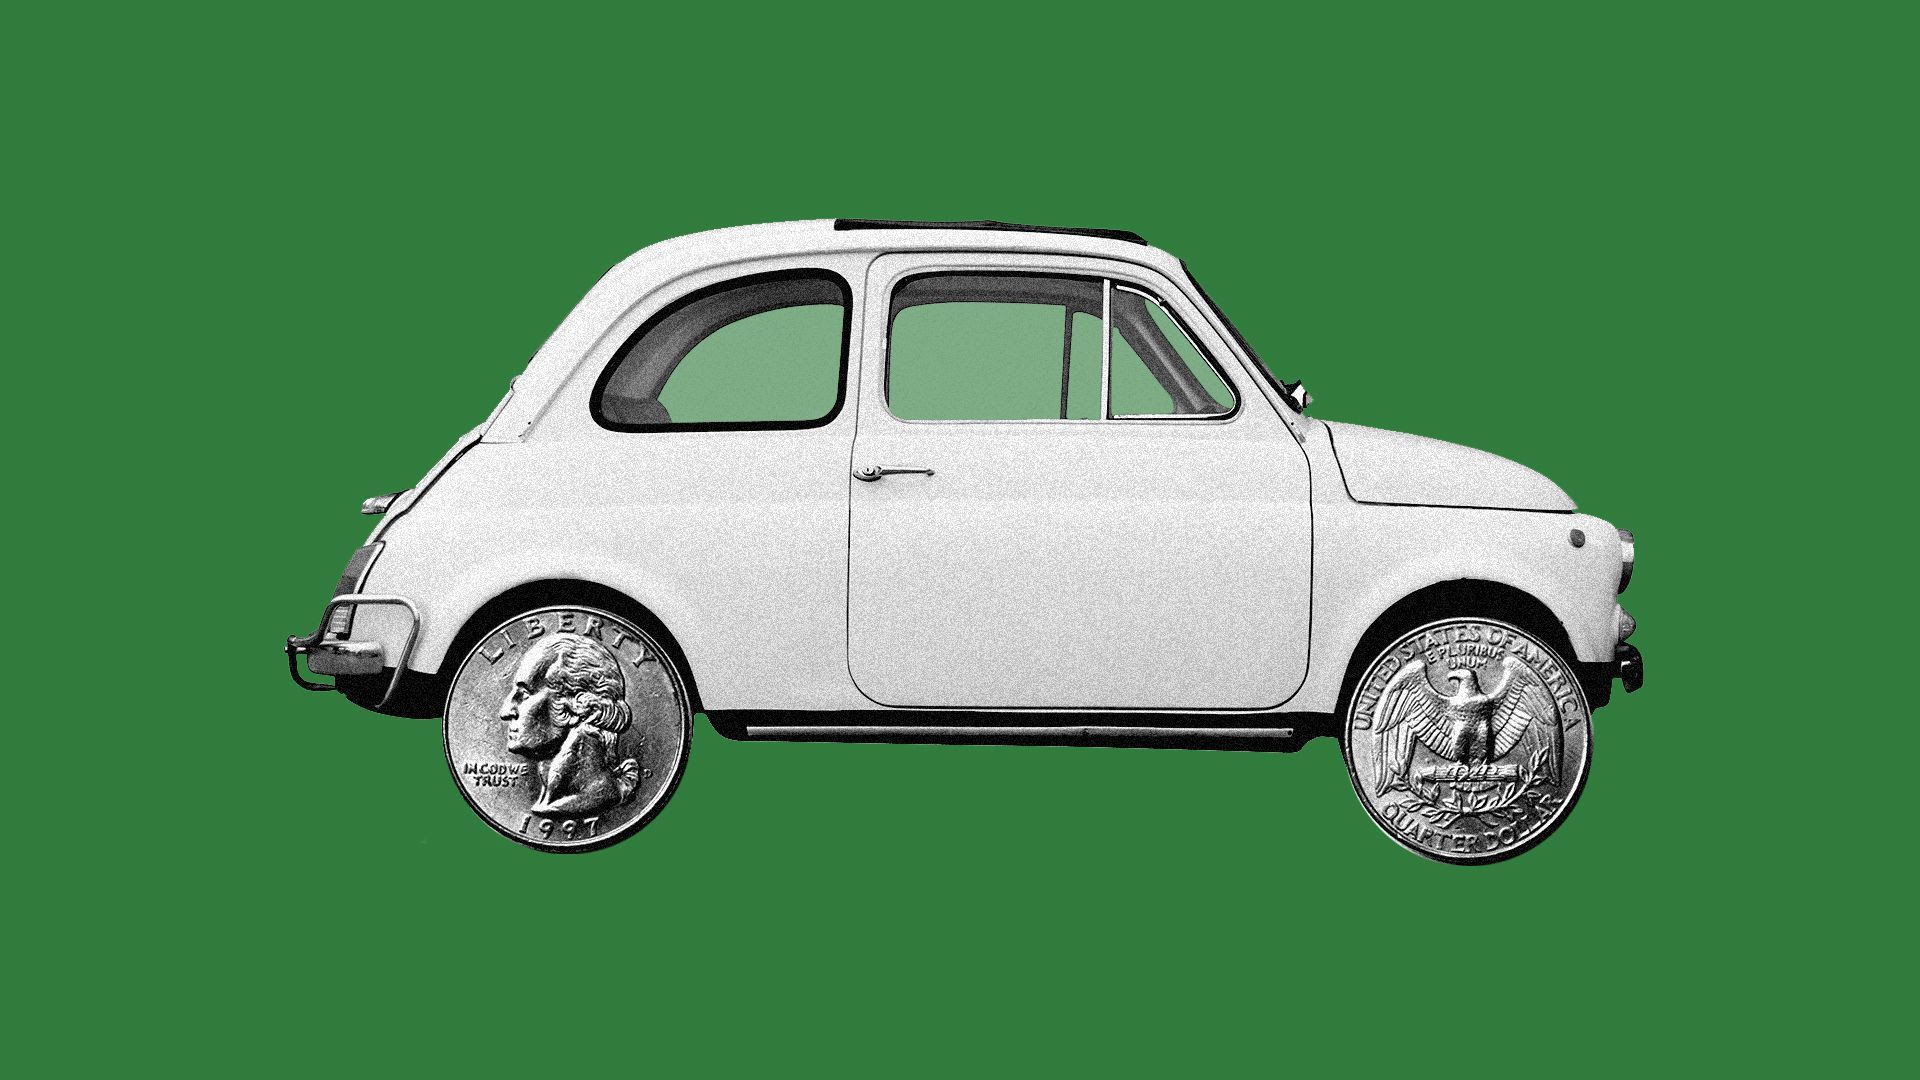 Illustration of a car with quarters for wheels